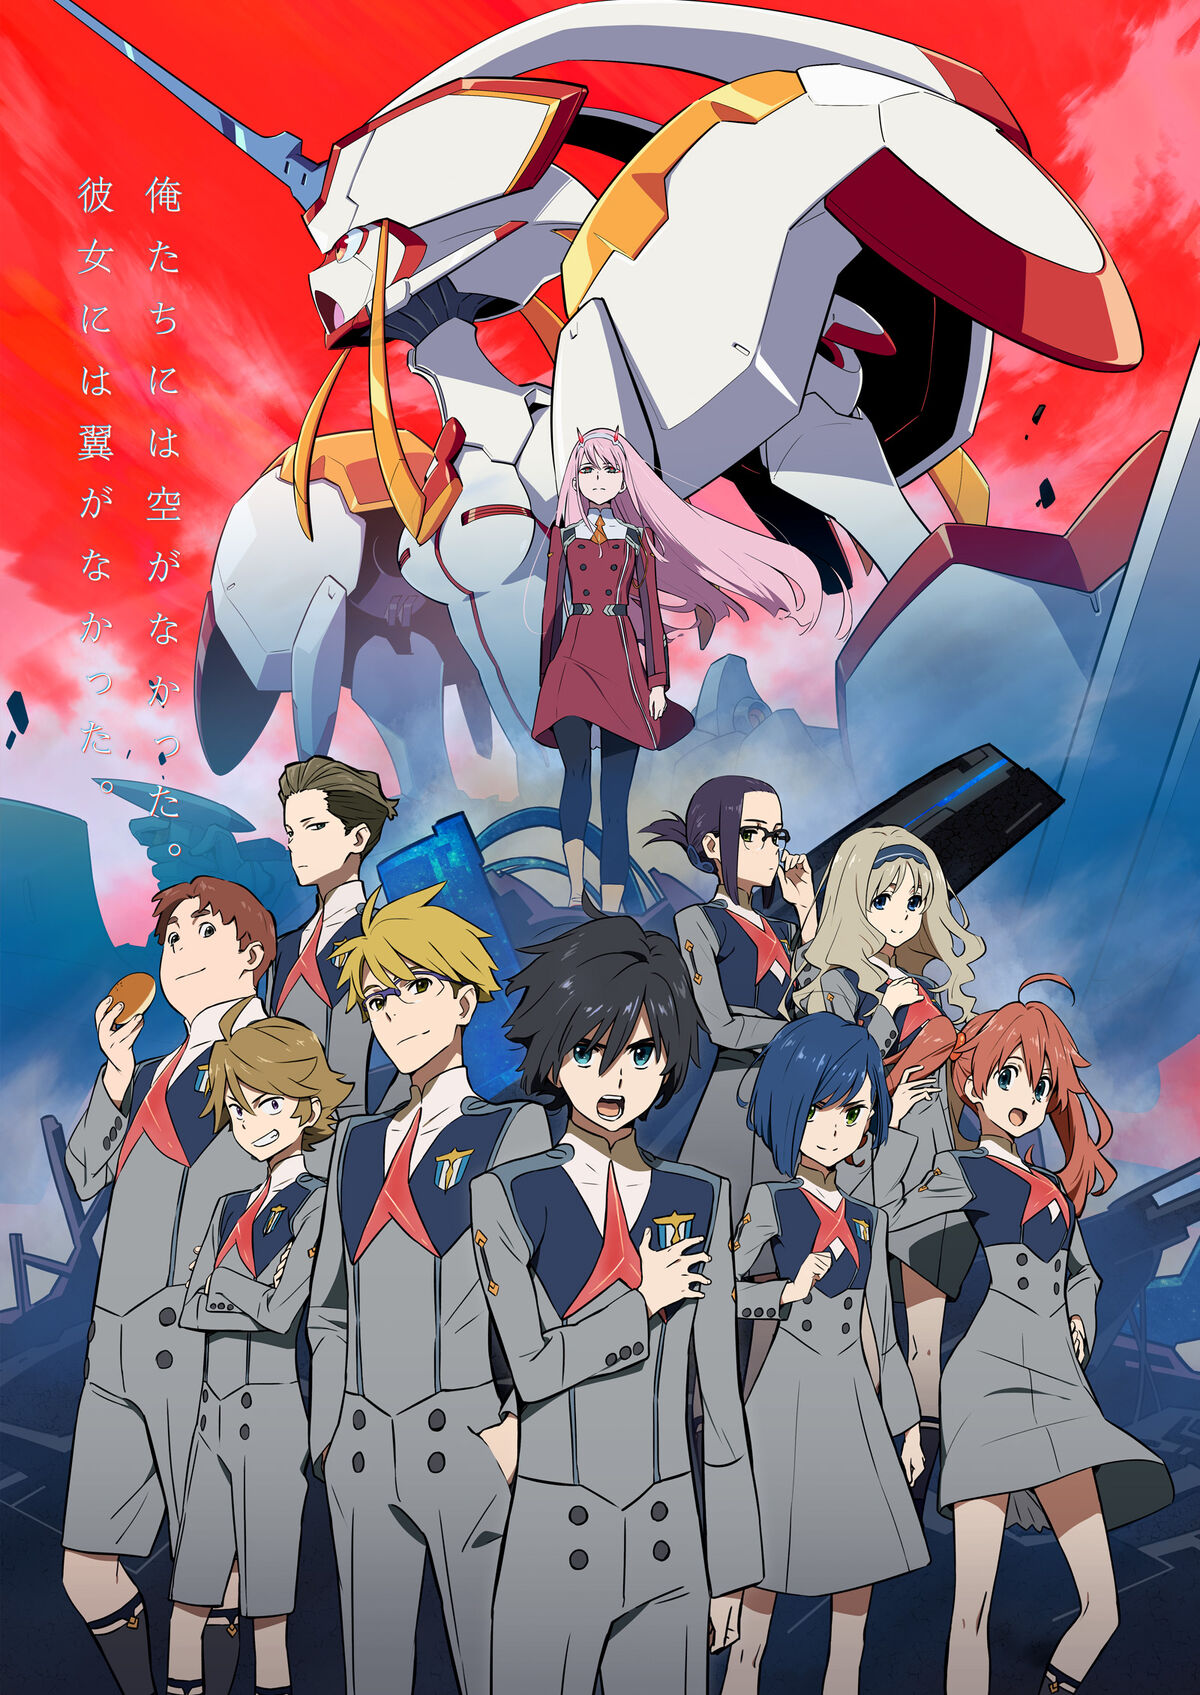 Anime and Manga Differences, DARLING in the FRANXX Wiki